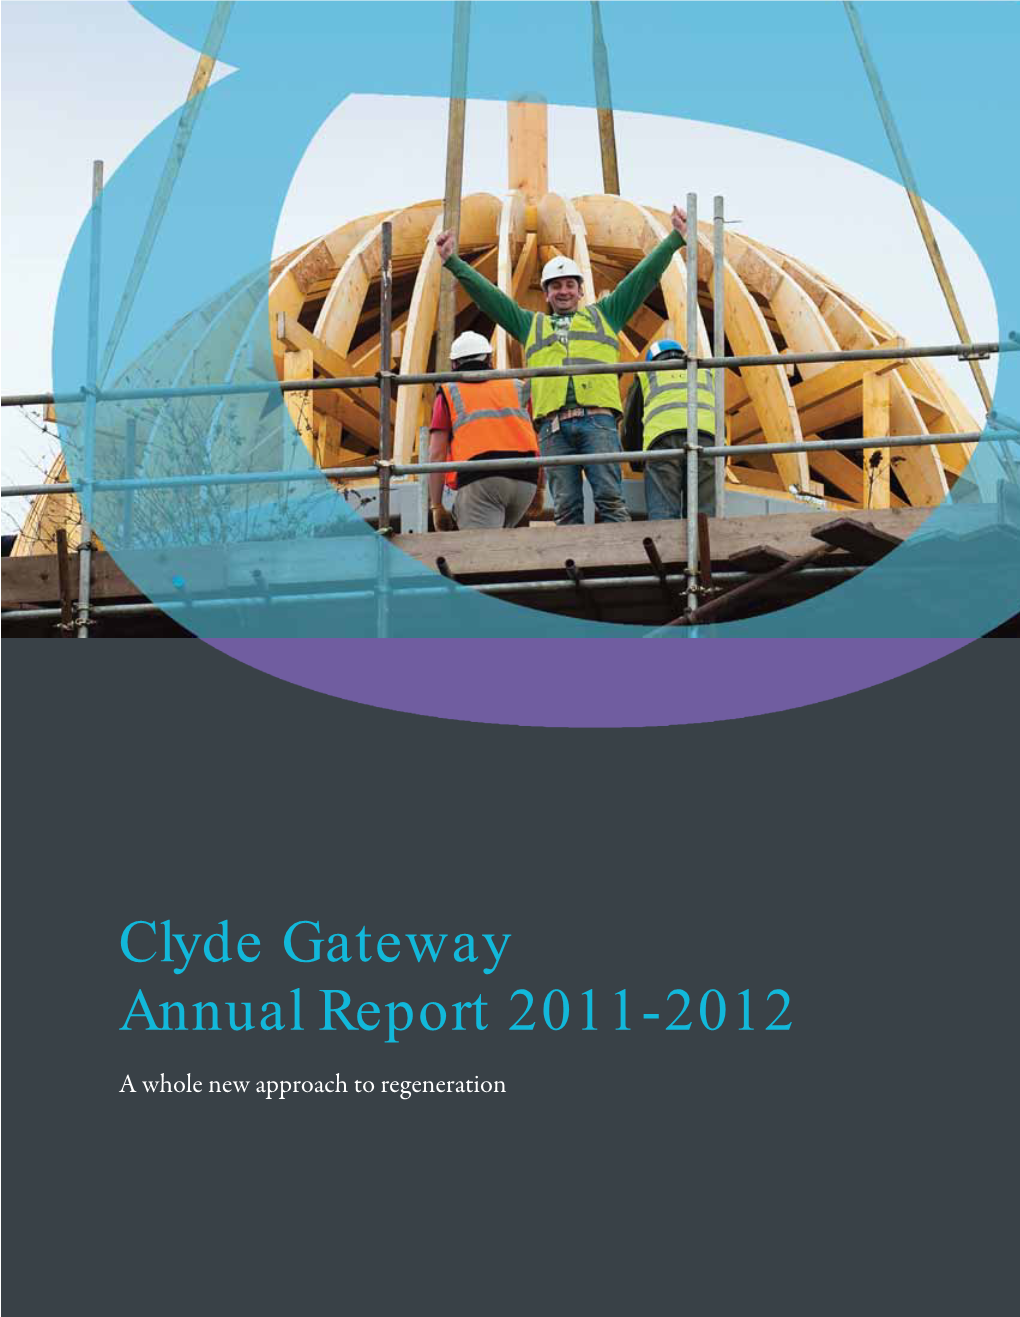 Clyde Gateway Annual Report 2011-2012